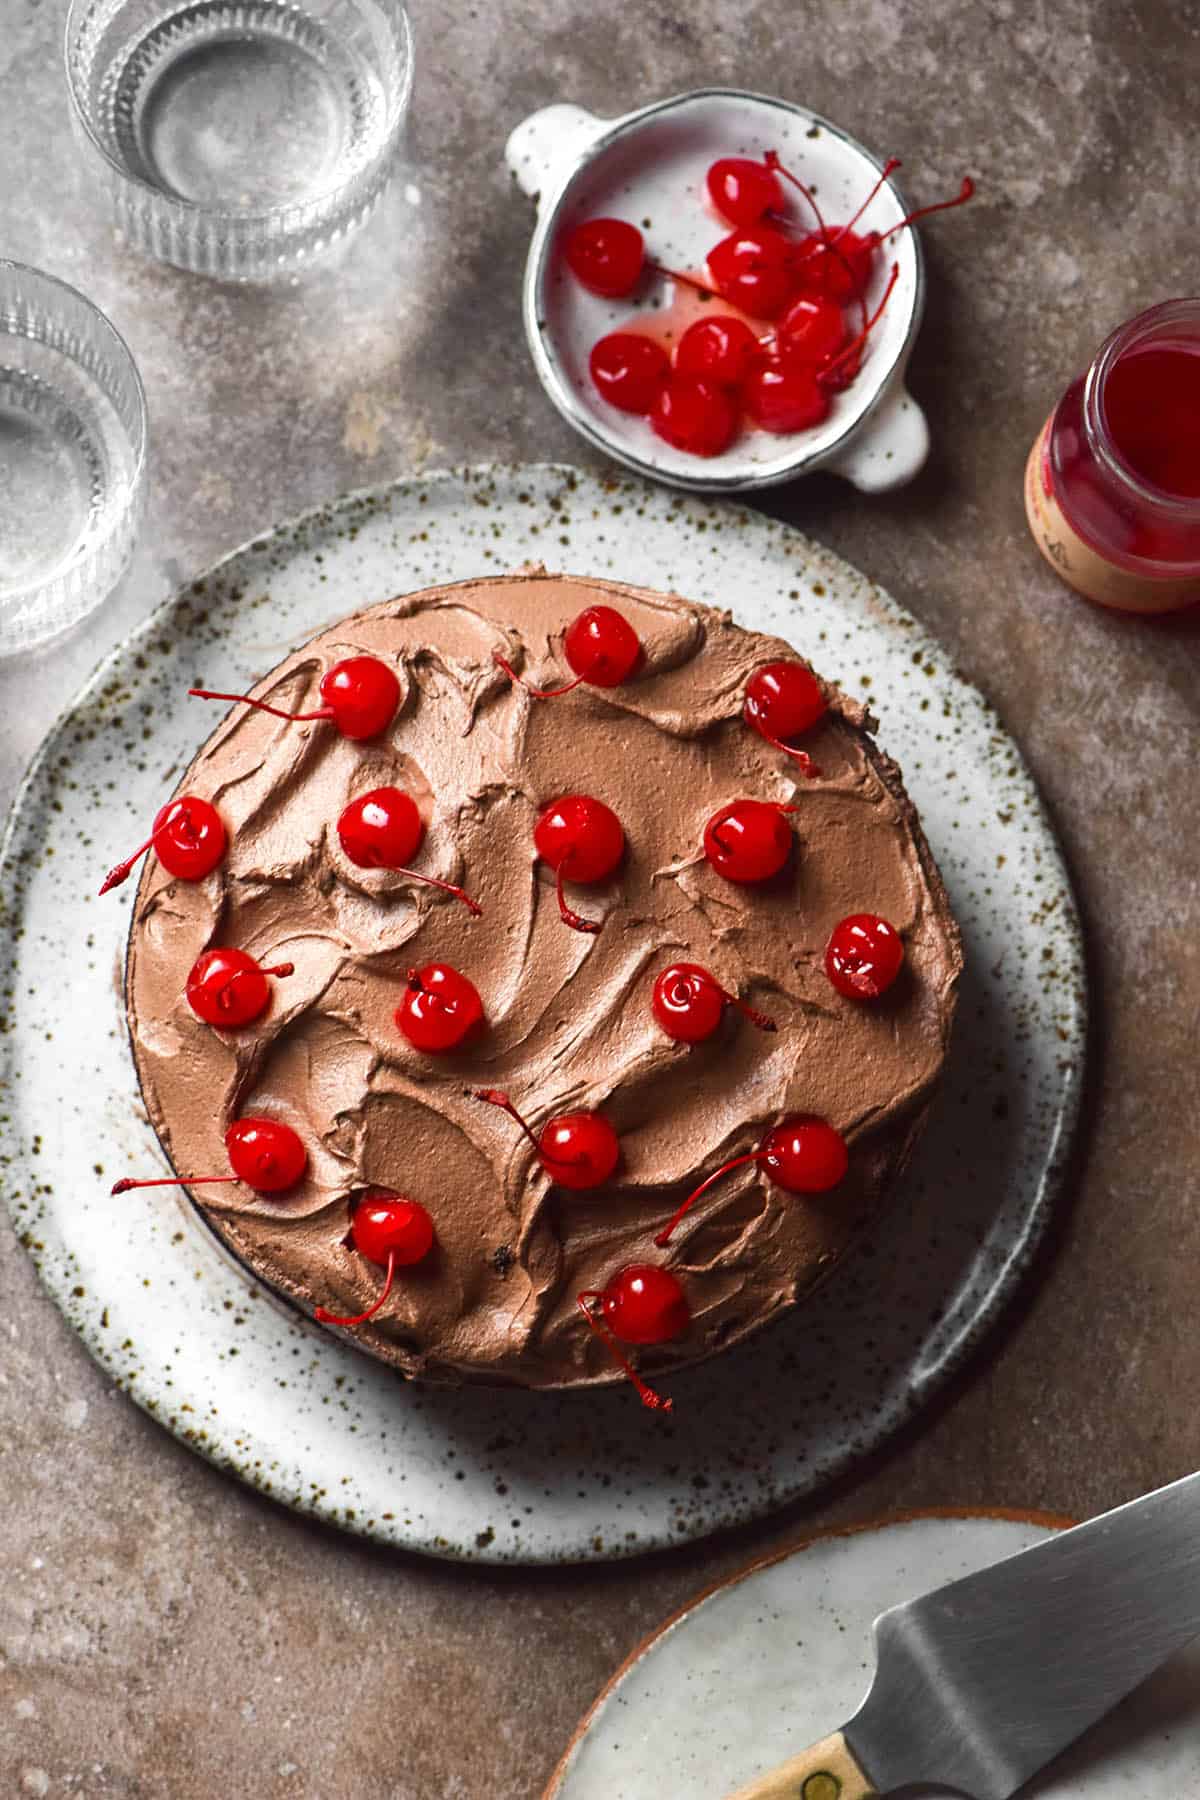 An aerial image of a gluten free dairy free chocolate layer cake topped with chocolate buttercream and maraschino cherries. The cake sits atop a stone backdrop and is surrounded by glasses of water, an extra plate and more maraschino cherries